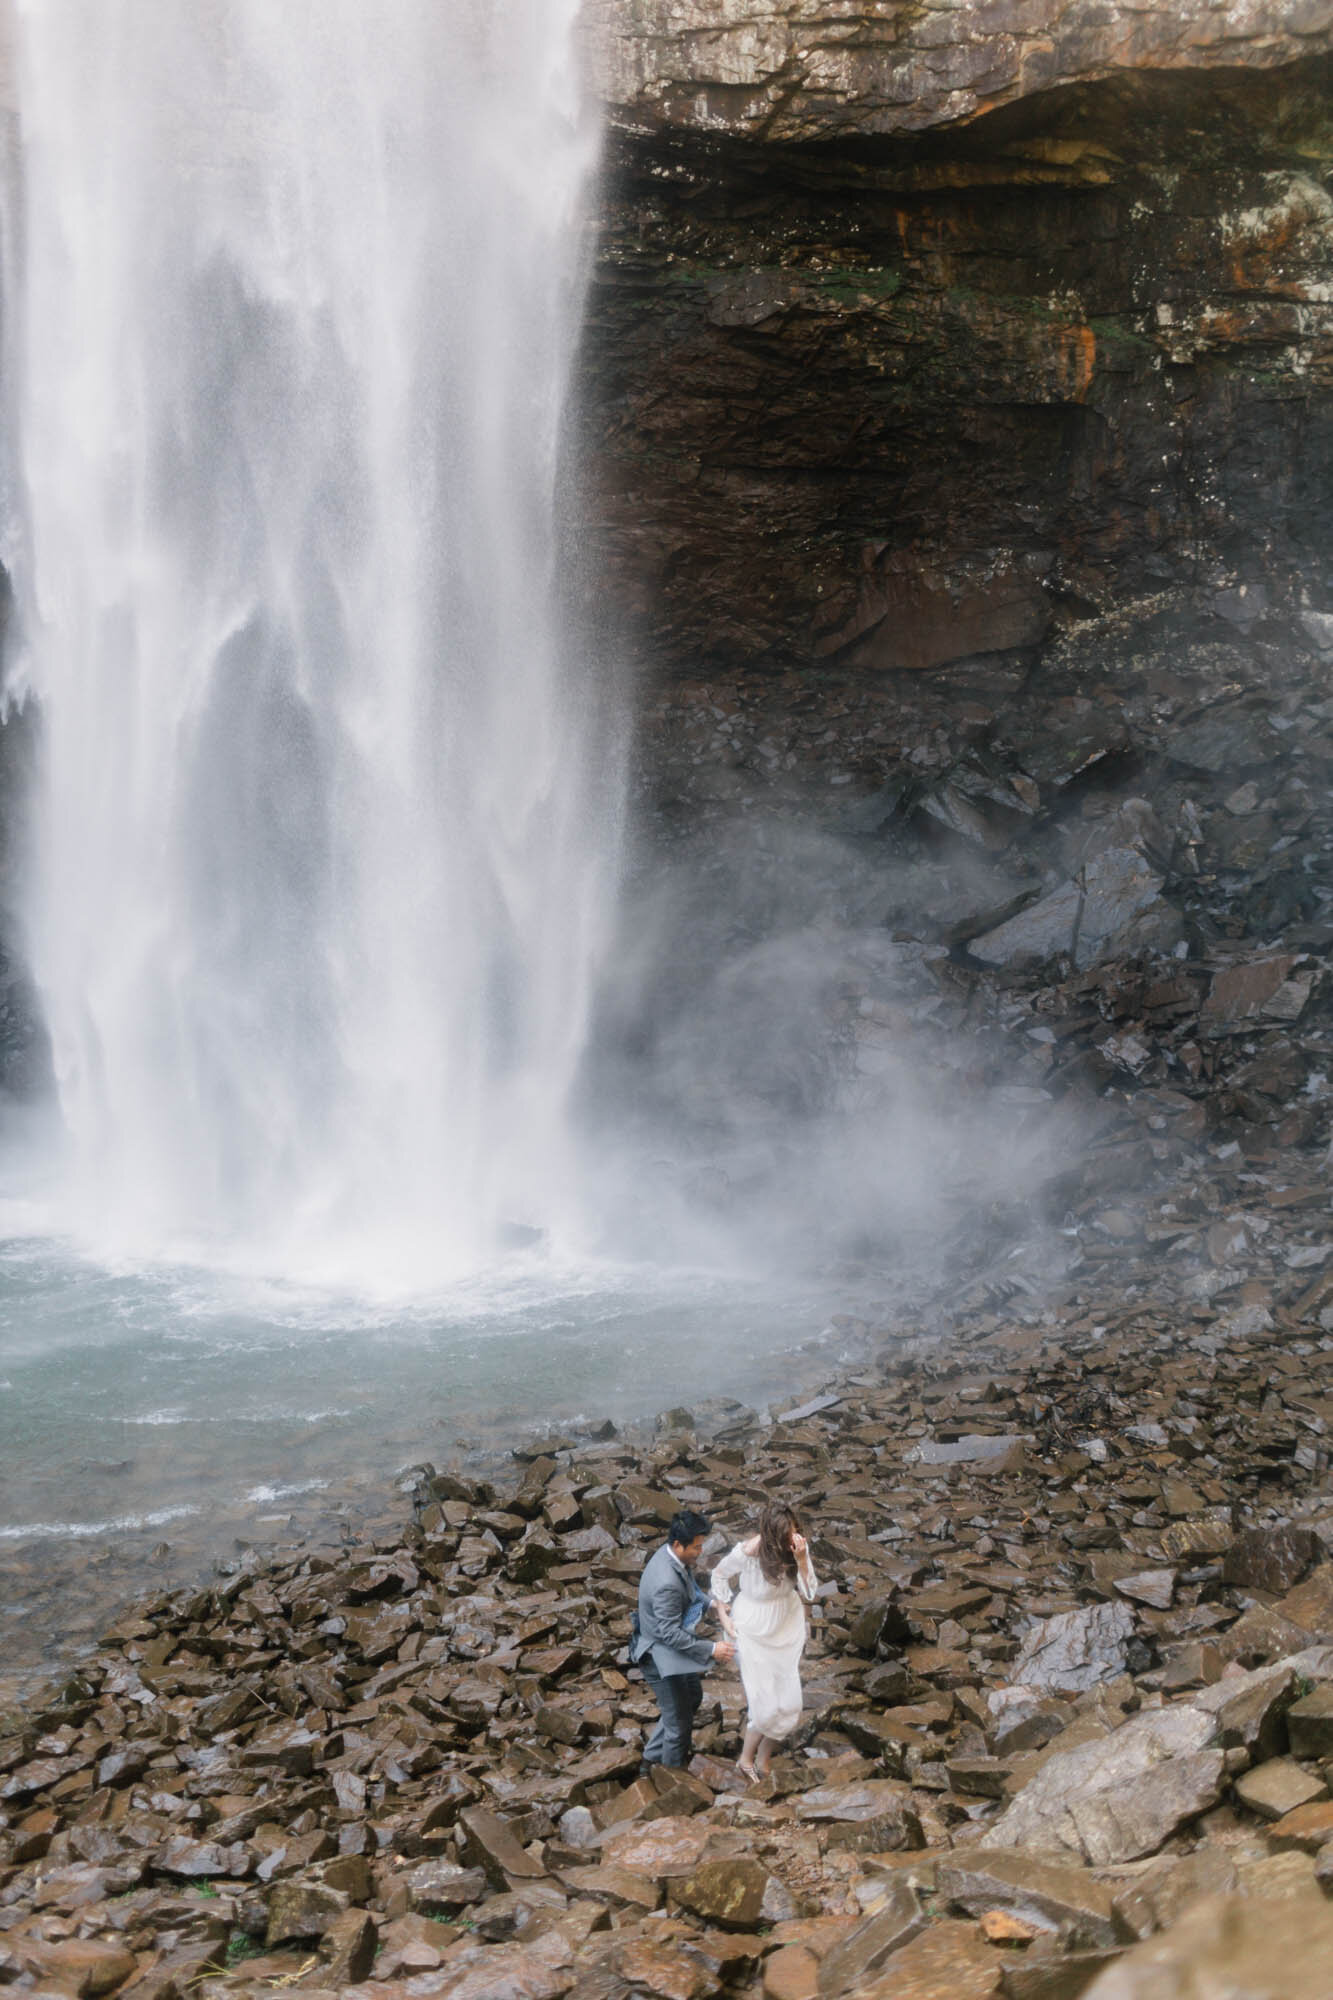 jessica-kovach-photography-finding-the-perfect-waterfall-for-your-elopement-eloping-in-fall-creek-falls-state-park-tn-188.jpg